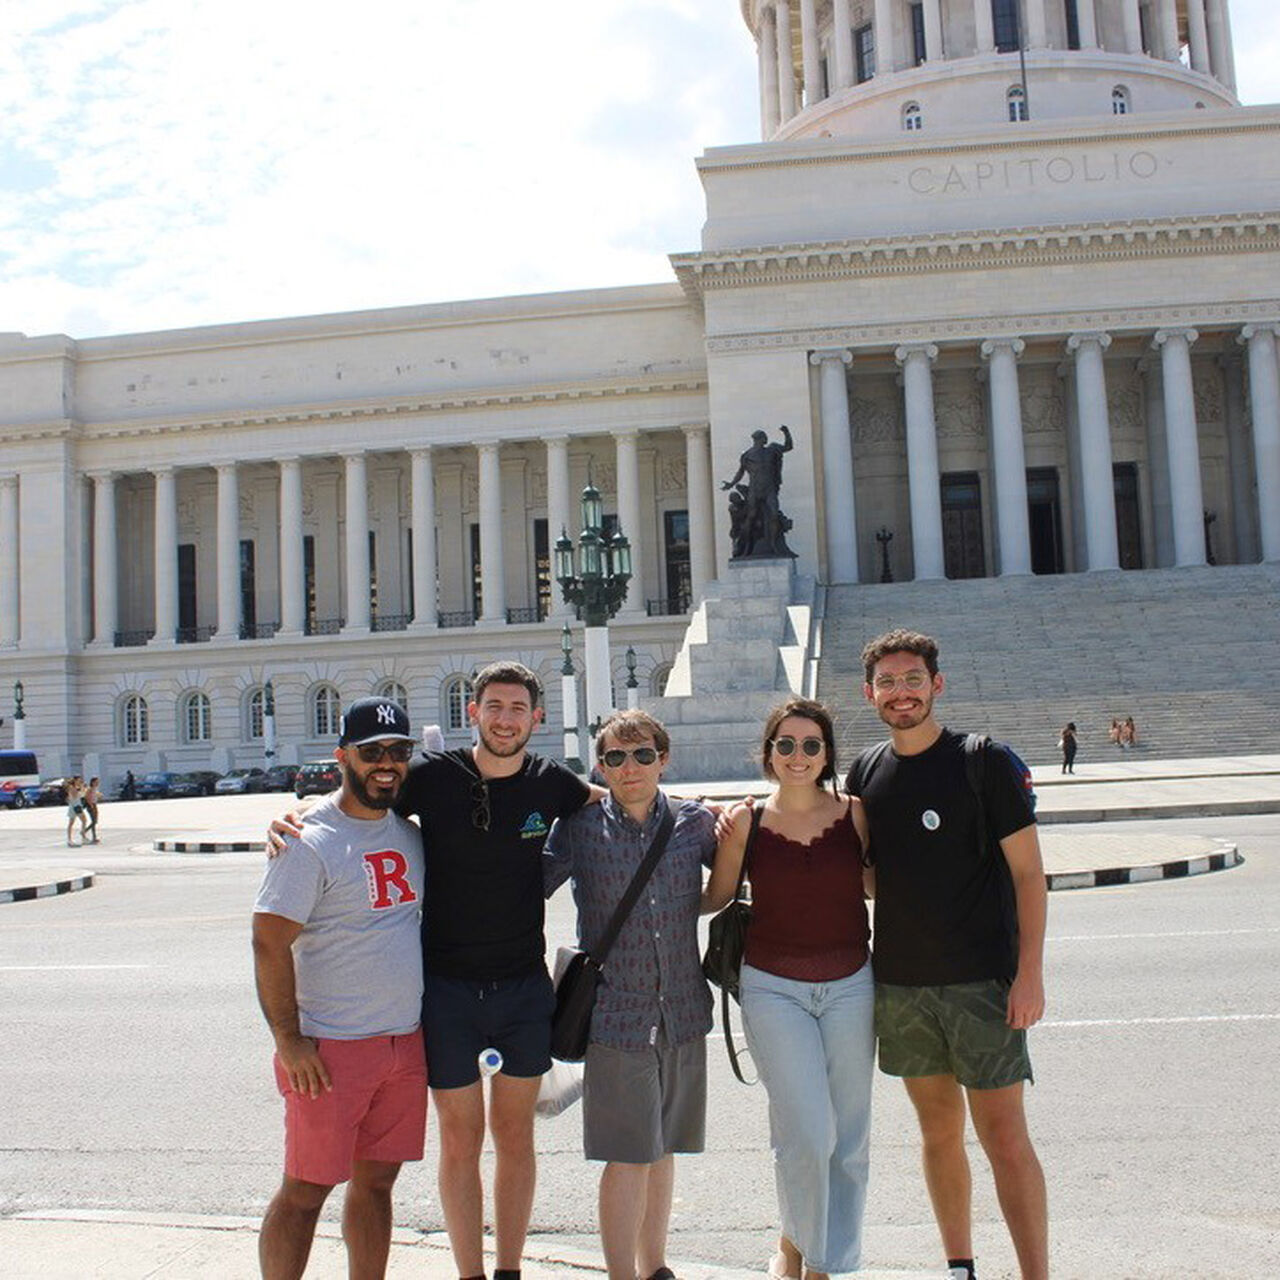 Rutgers Law School students smiling in a group in front of a government building in Cuba image number 0